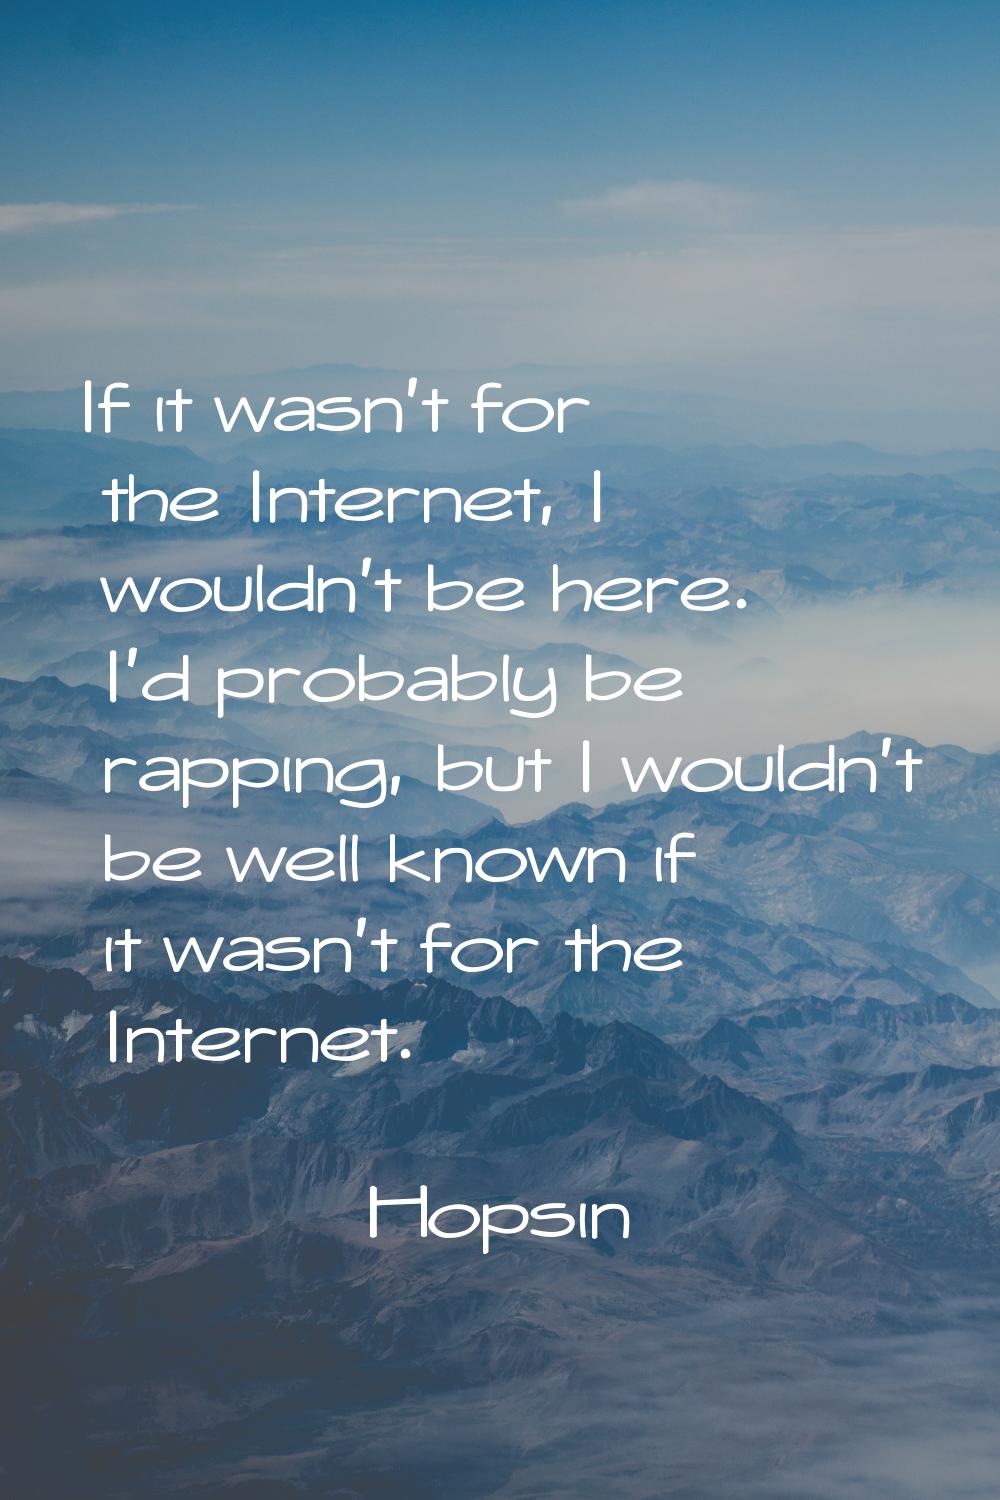 If it wasn't for the Internet, I wouldn't be here. I'd probably be rapping, but I wouldn't be well 